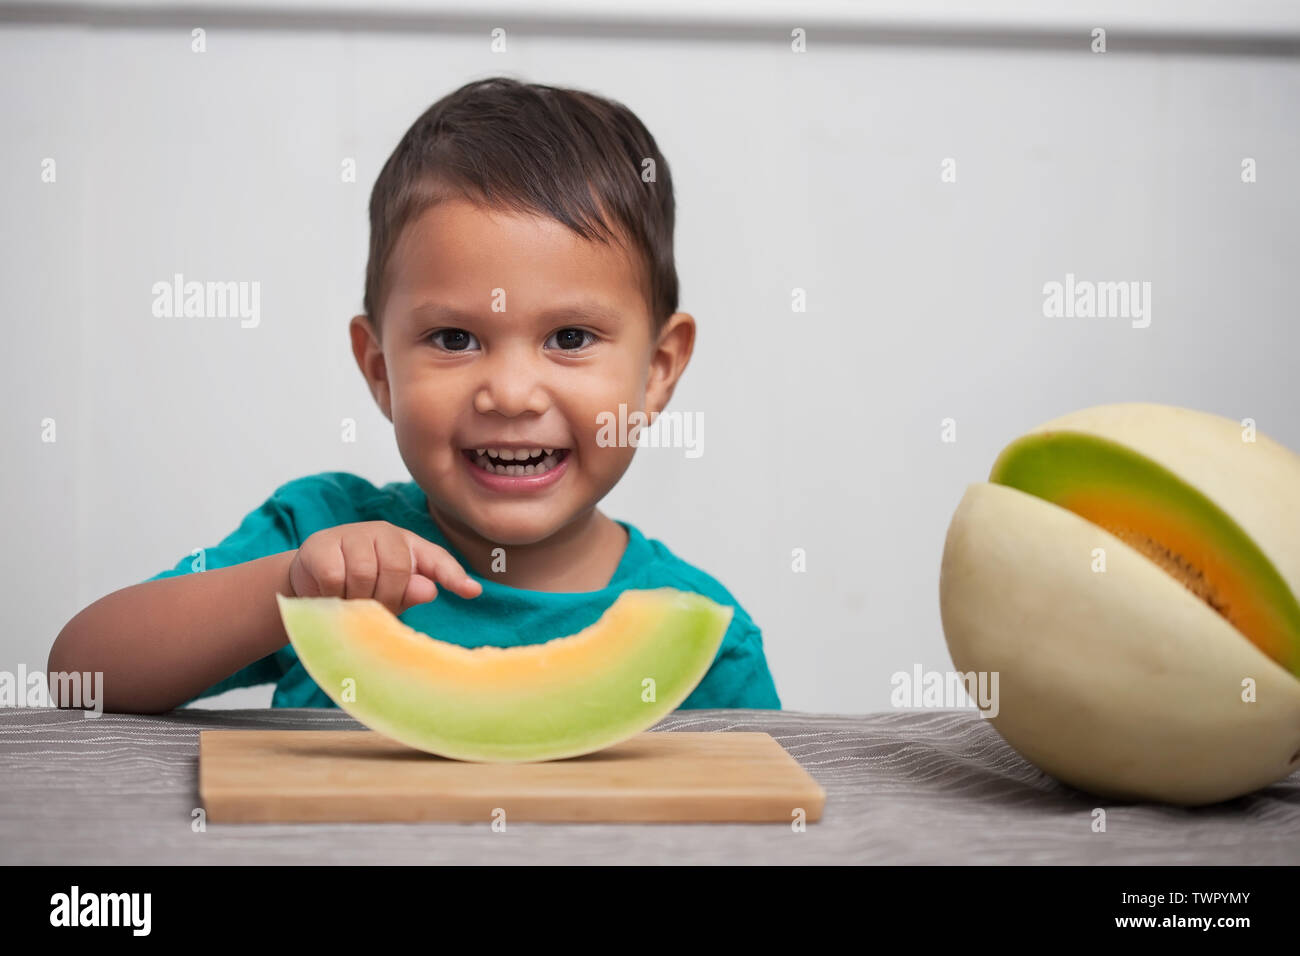 A happy young kid with cute smile points to his slice of a honeydew melon he is about to eat as part of a healthy snack. Stock Photo